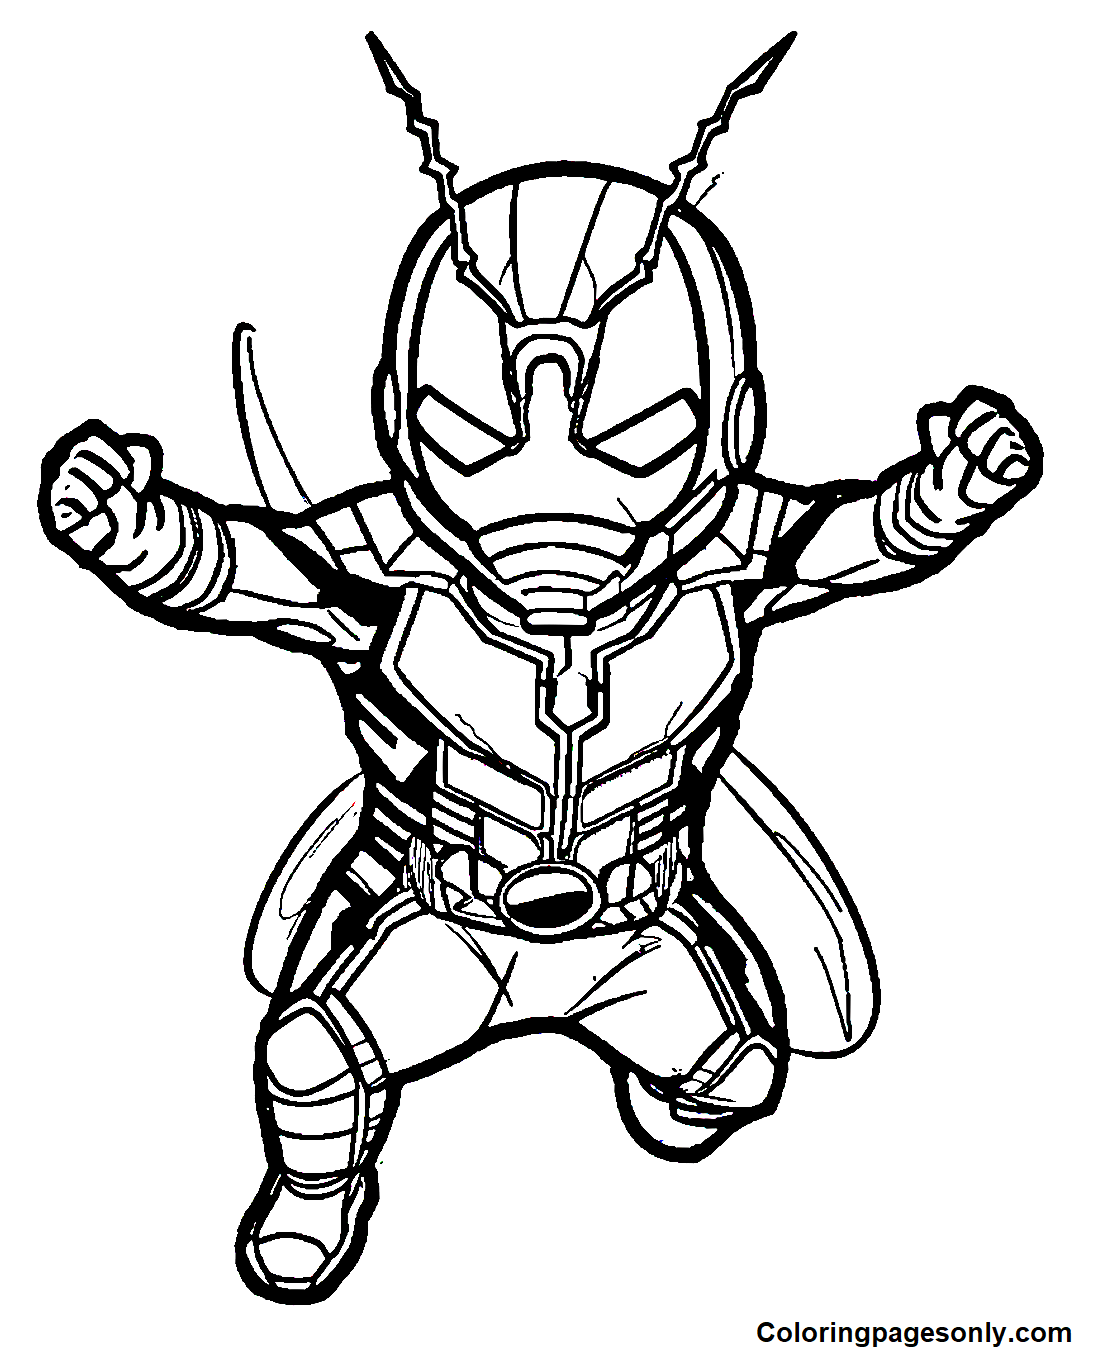 How to Draw Ant-Man from the 2015 Film: A Step-by-Step Tutorial